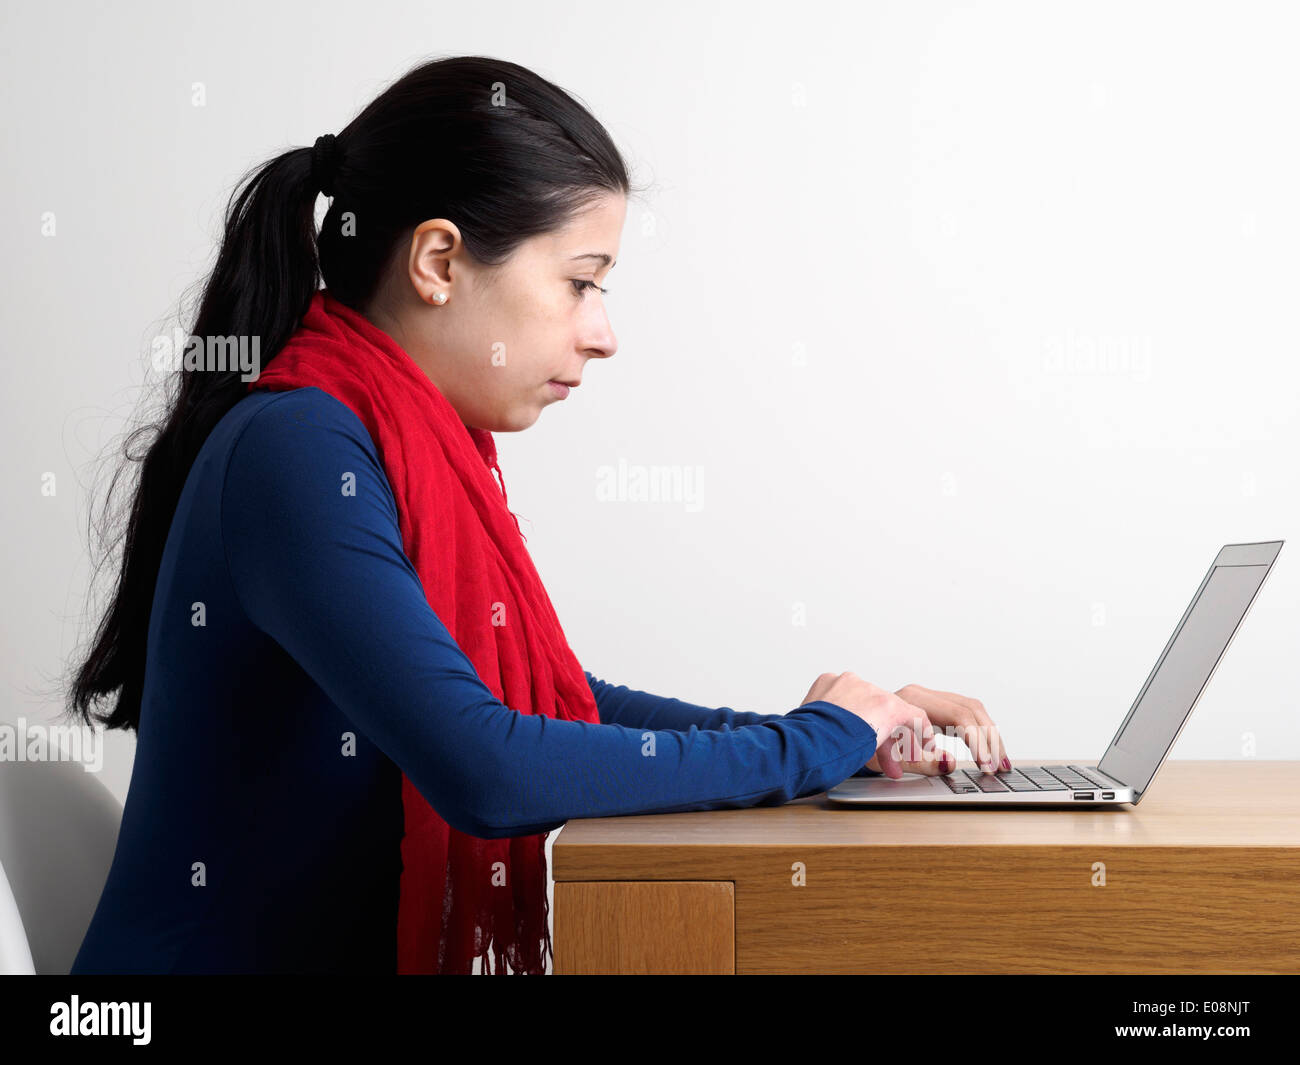 Side view of a young woman using a laptop computer on a wooden desk Stock Photo